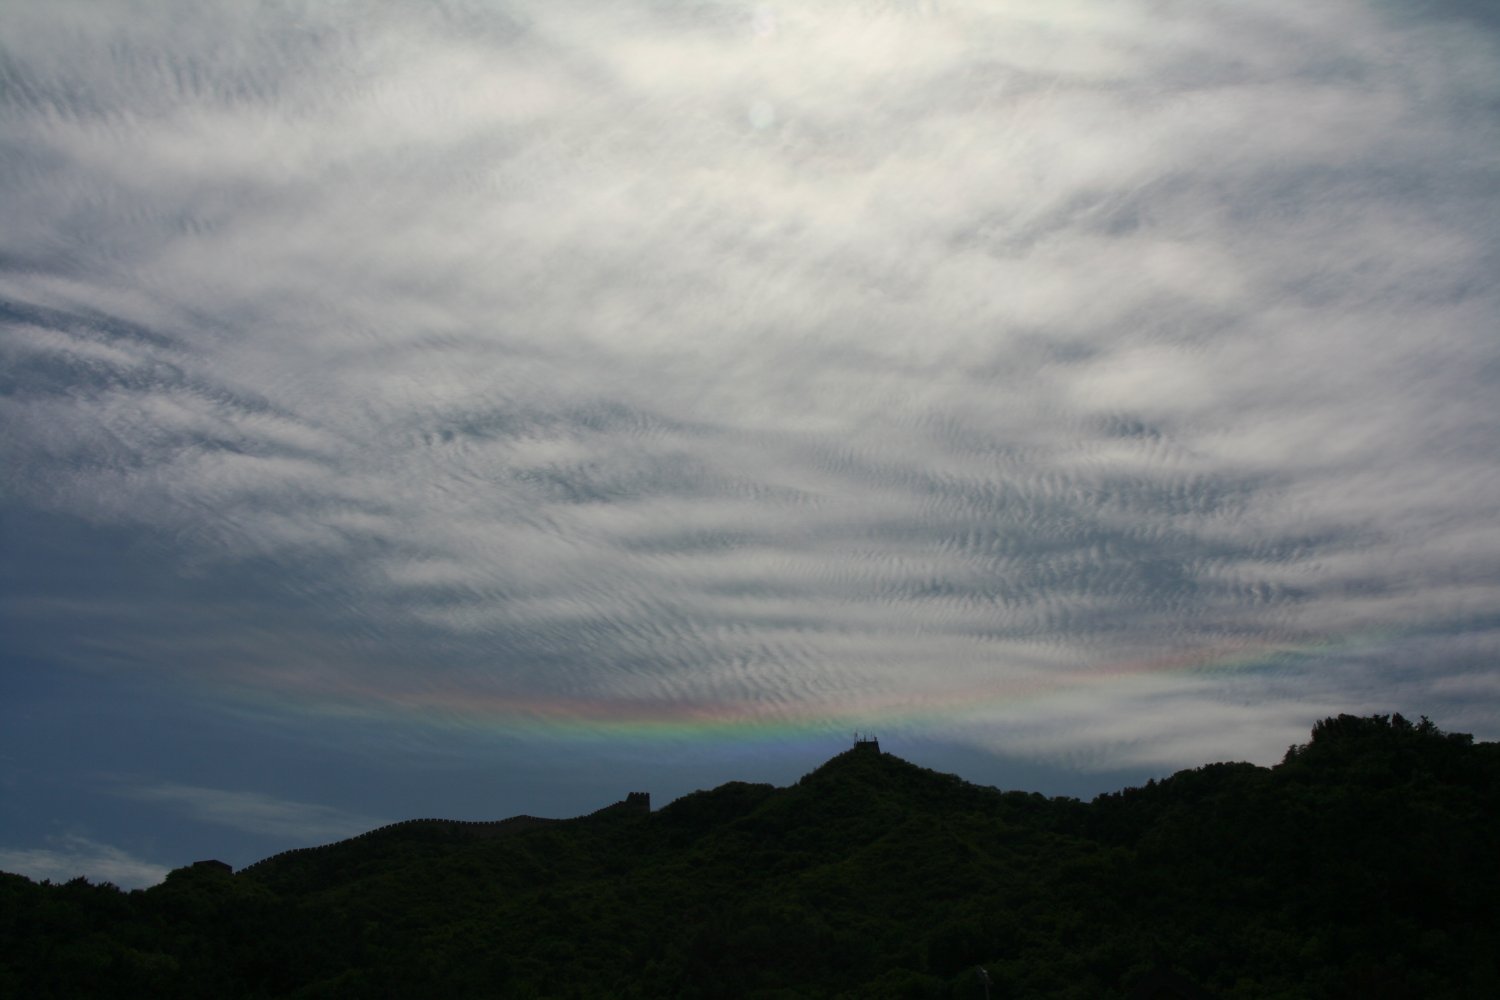 Circumhorizon arc over Great Chinese Wall: 112 KB; click on the image to enlarge to 1000x1500 pixel